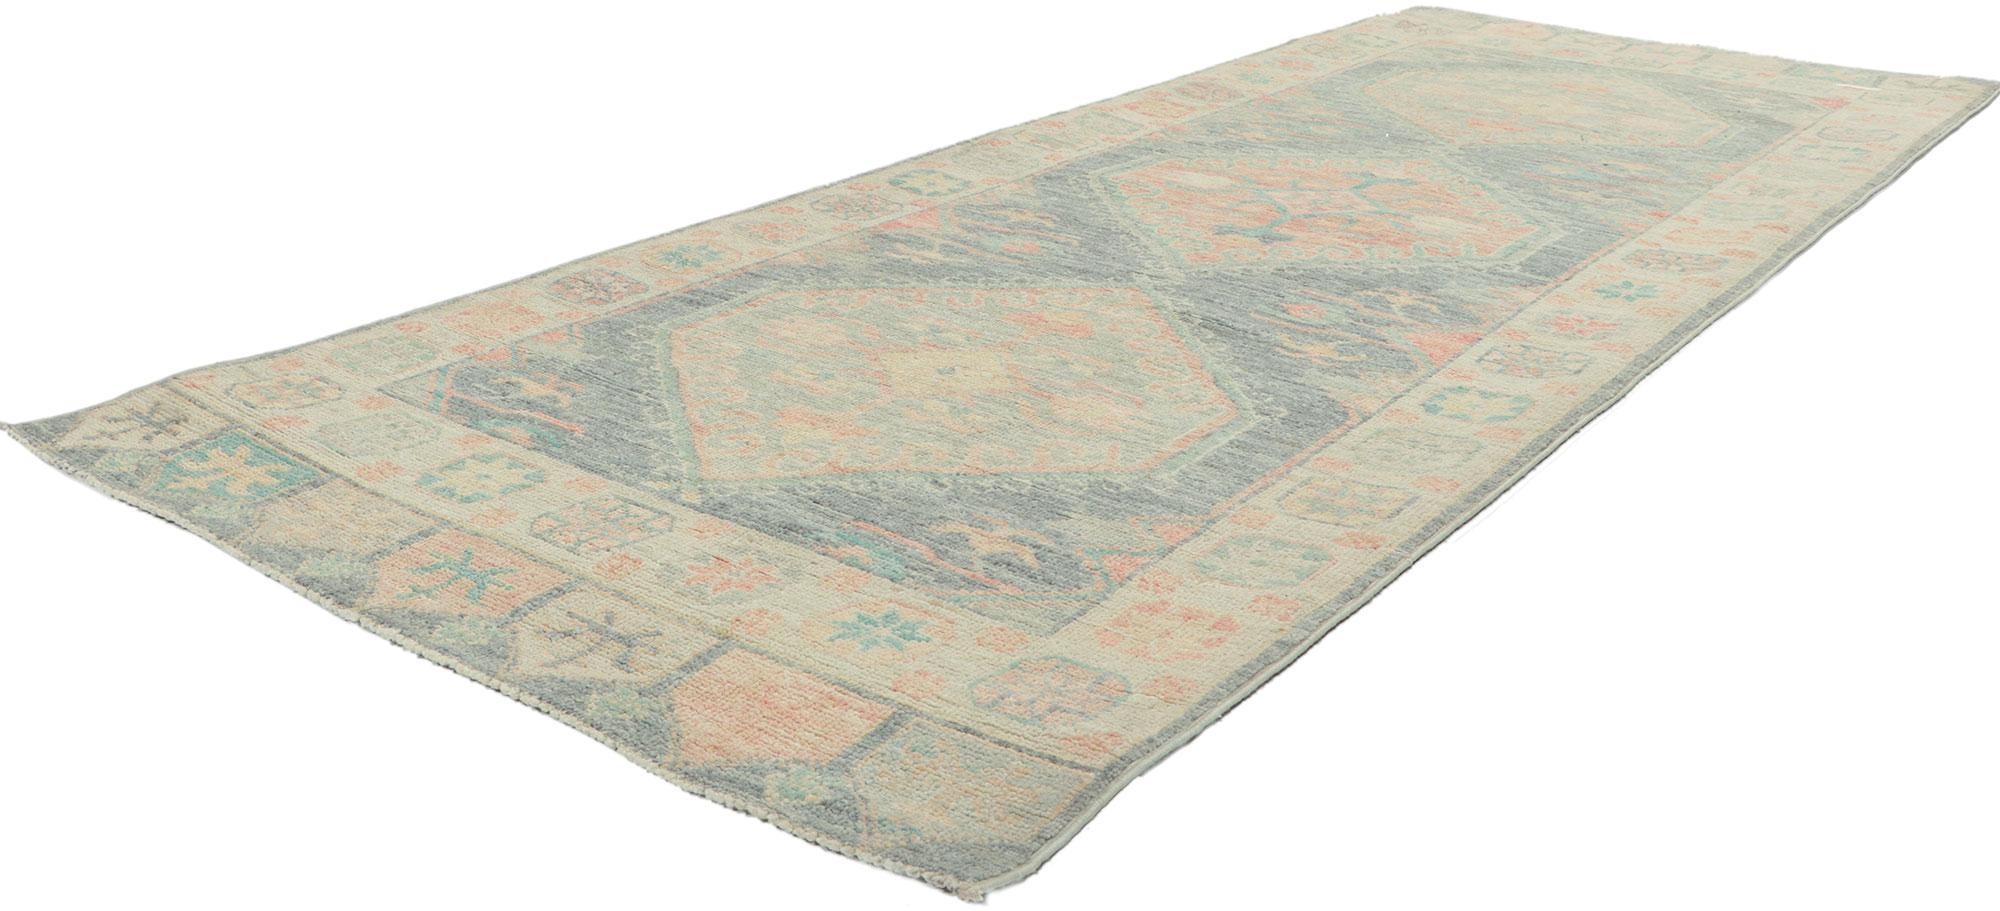 80873 New Contemporary Oushak runner with Soft Pastel Colors, 03'02 x 08'01.